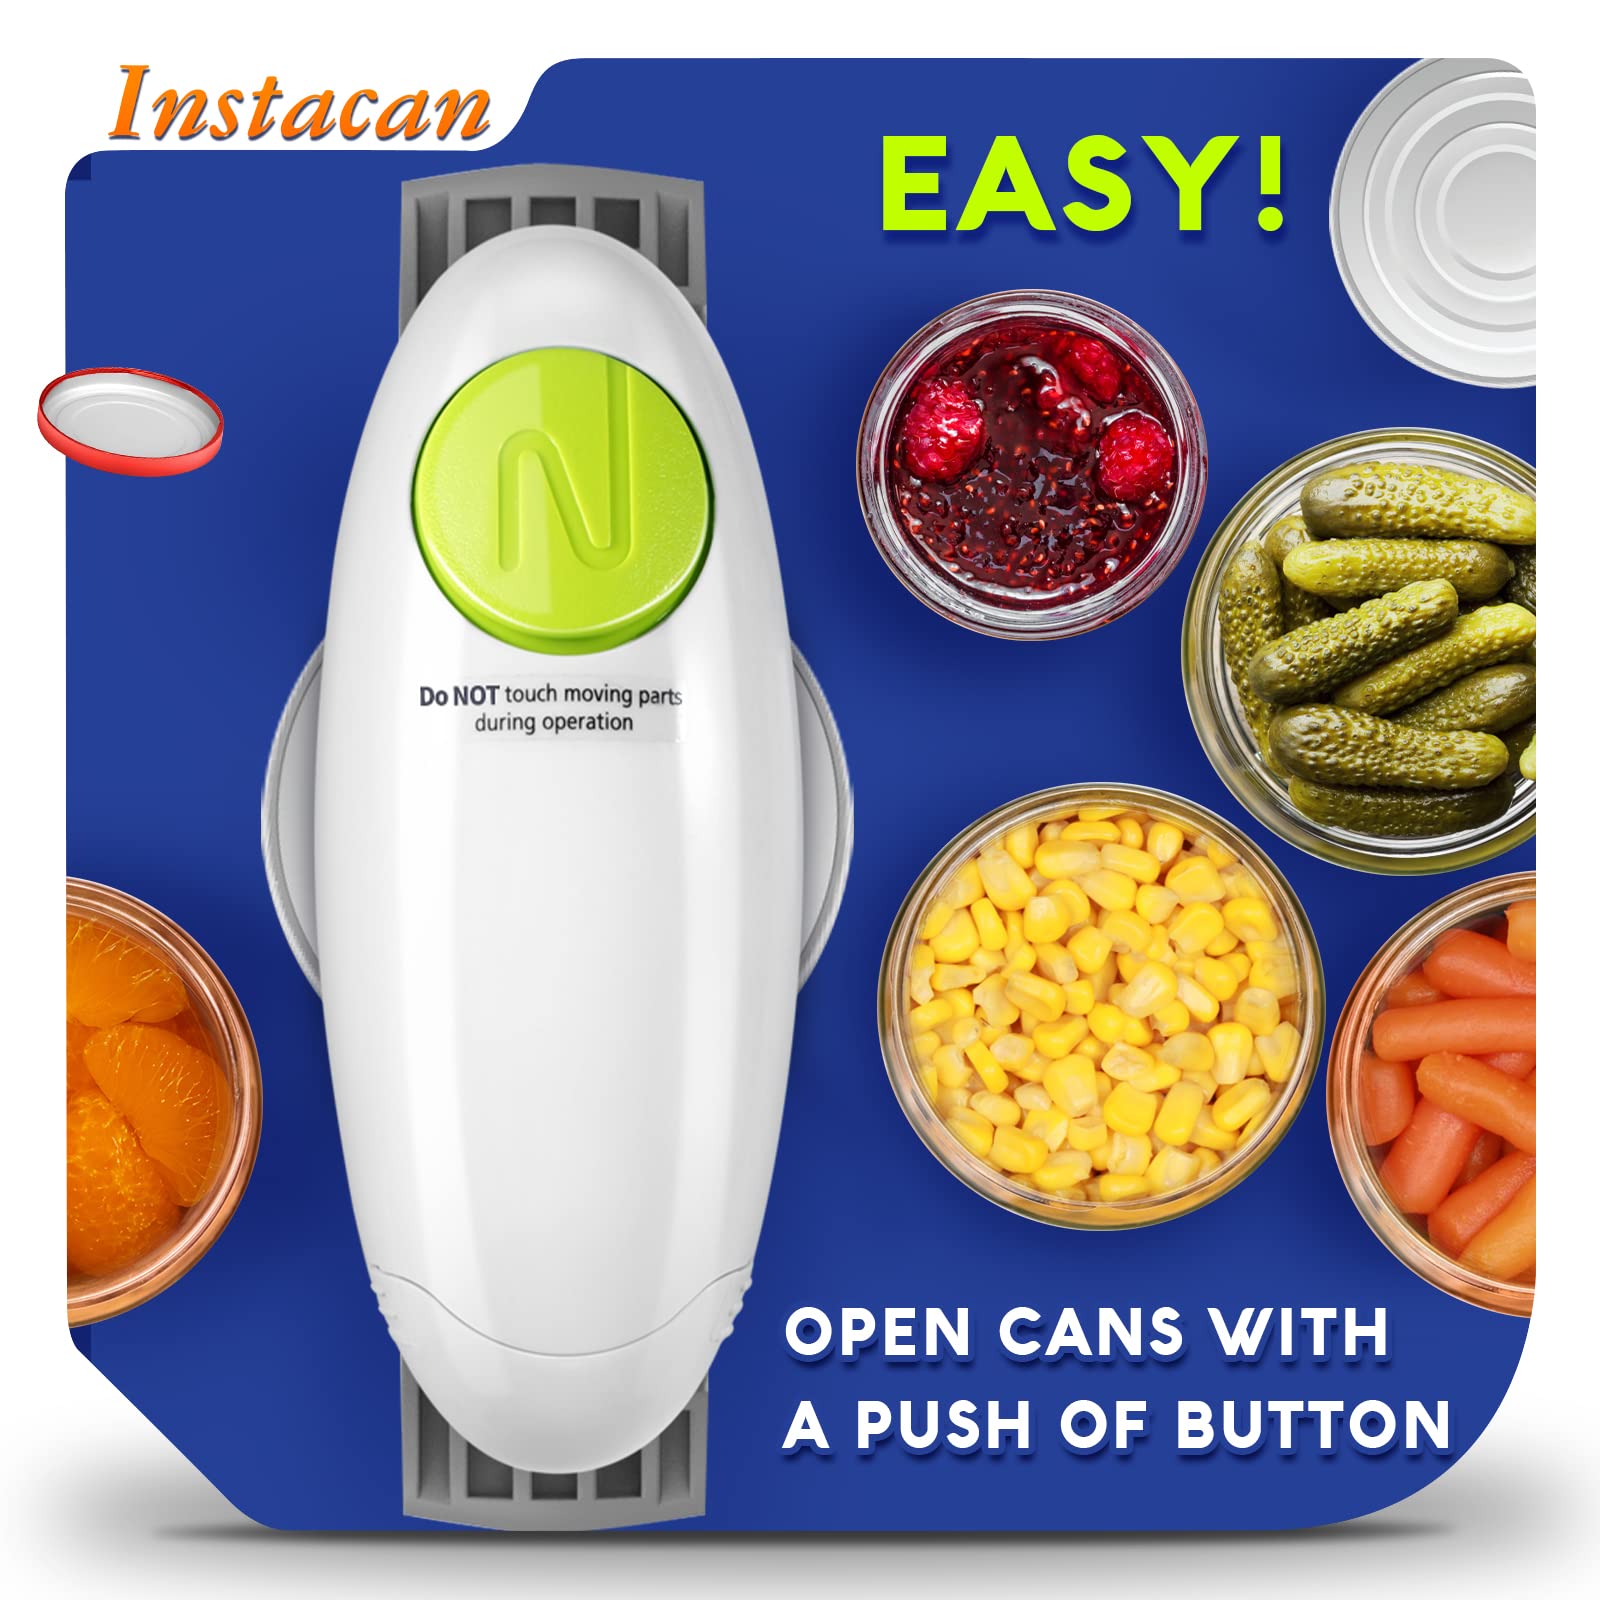 Higher Torque Electric Jar Opener Easy Unscrew Almost Size Lid with Auto-Off, Powerful Bottle Opener for Arthritic Hands, Effortless Kitchen Gadgets for Weak Hands and Seniors with Arthritis